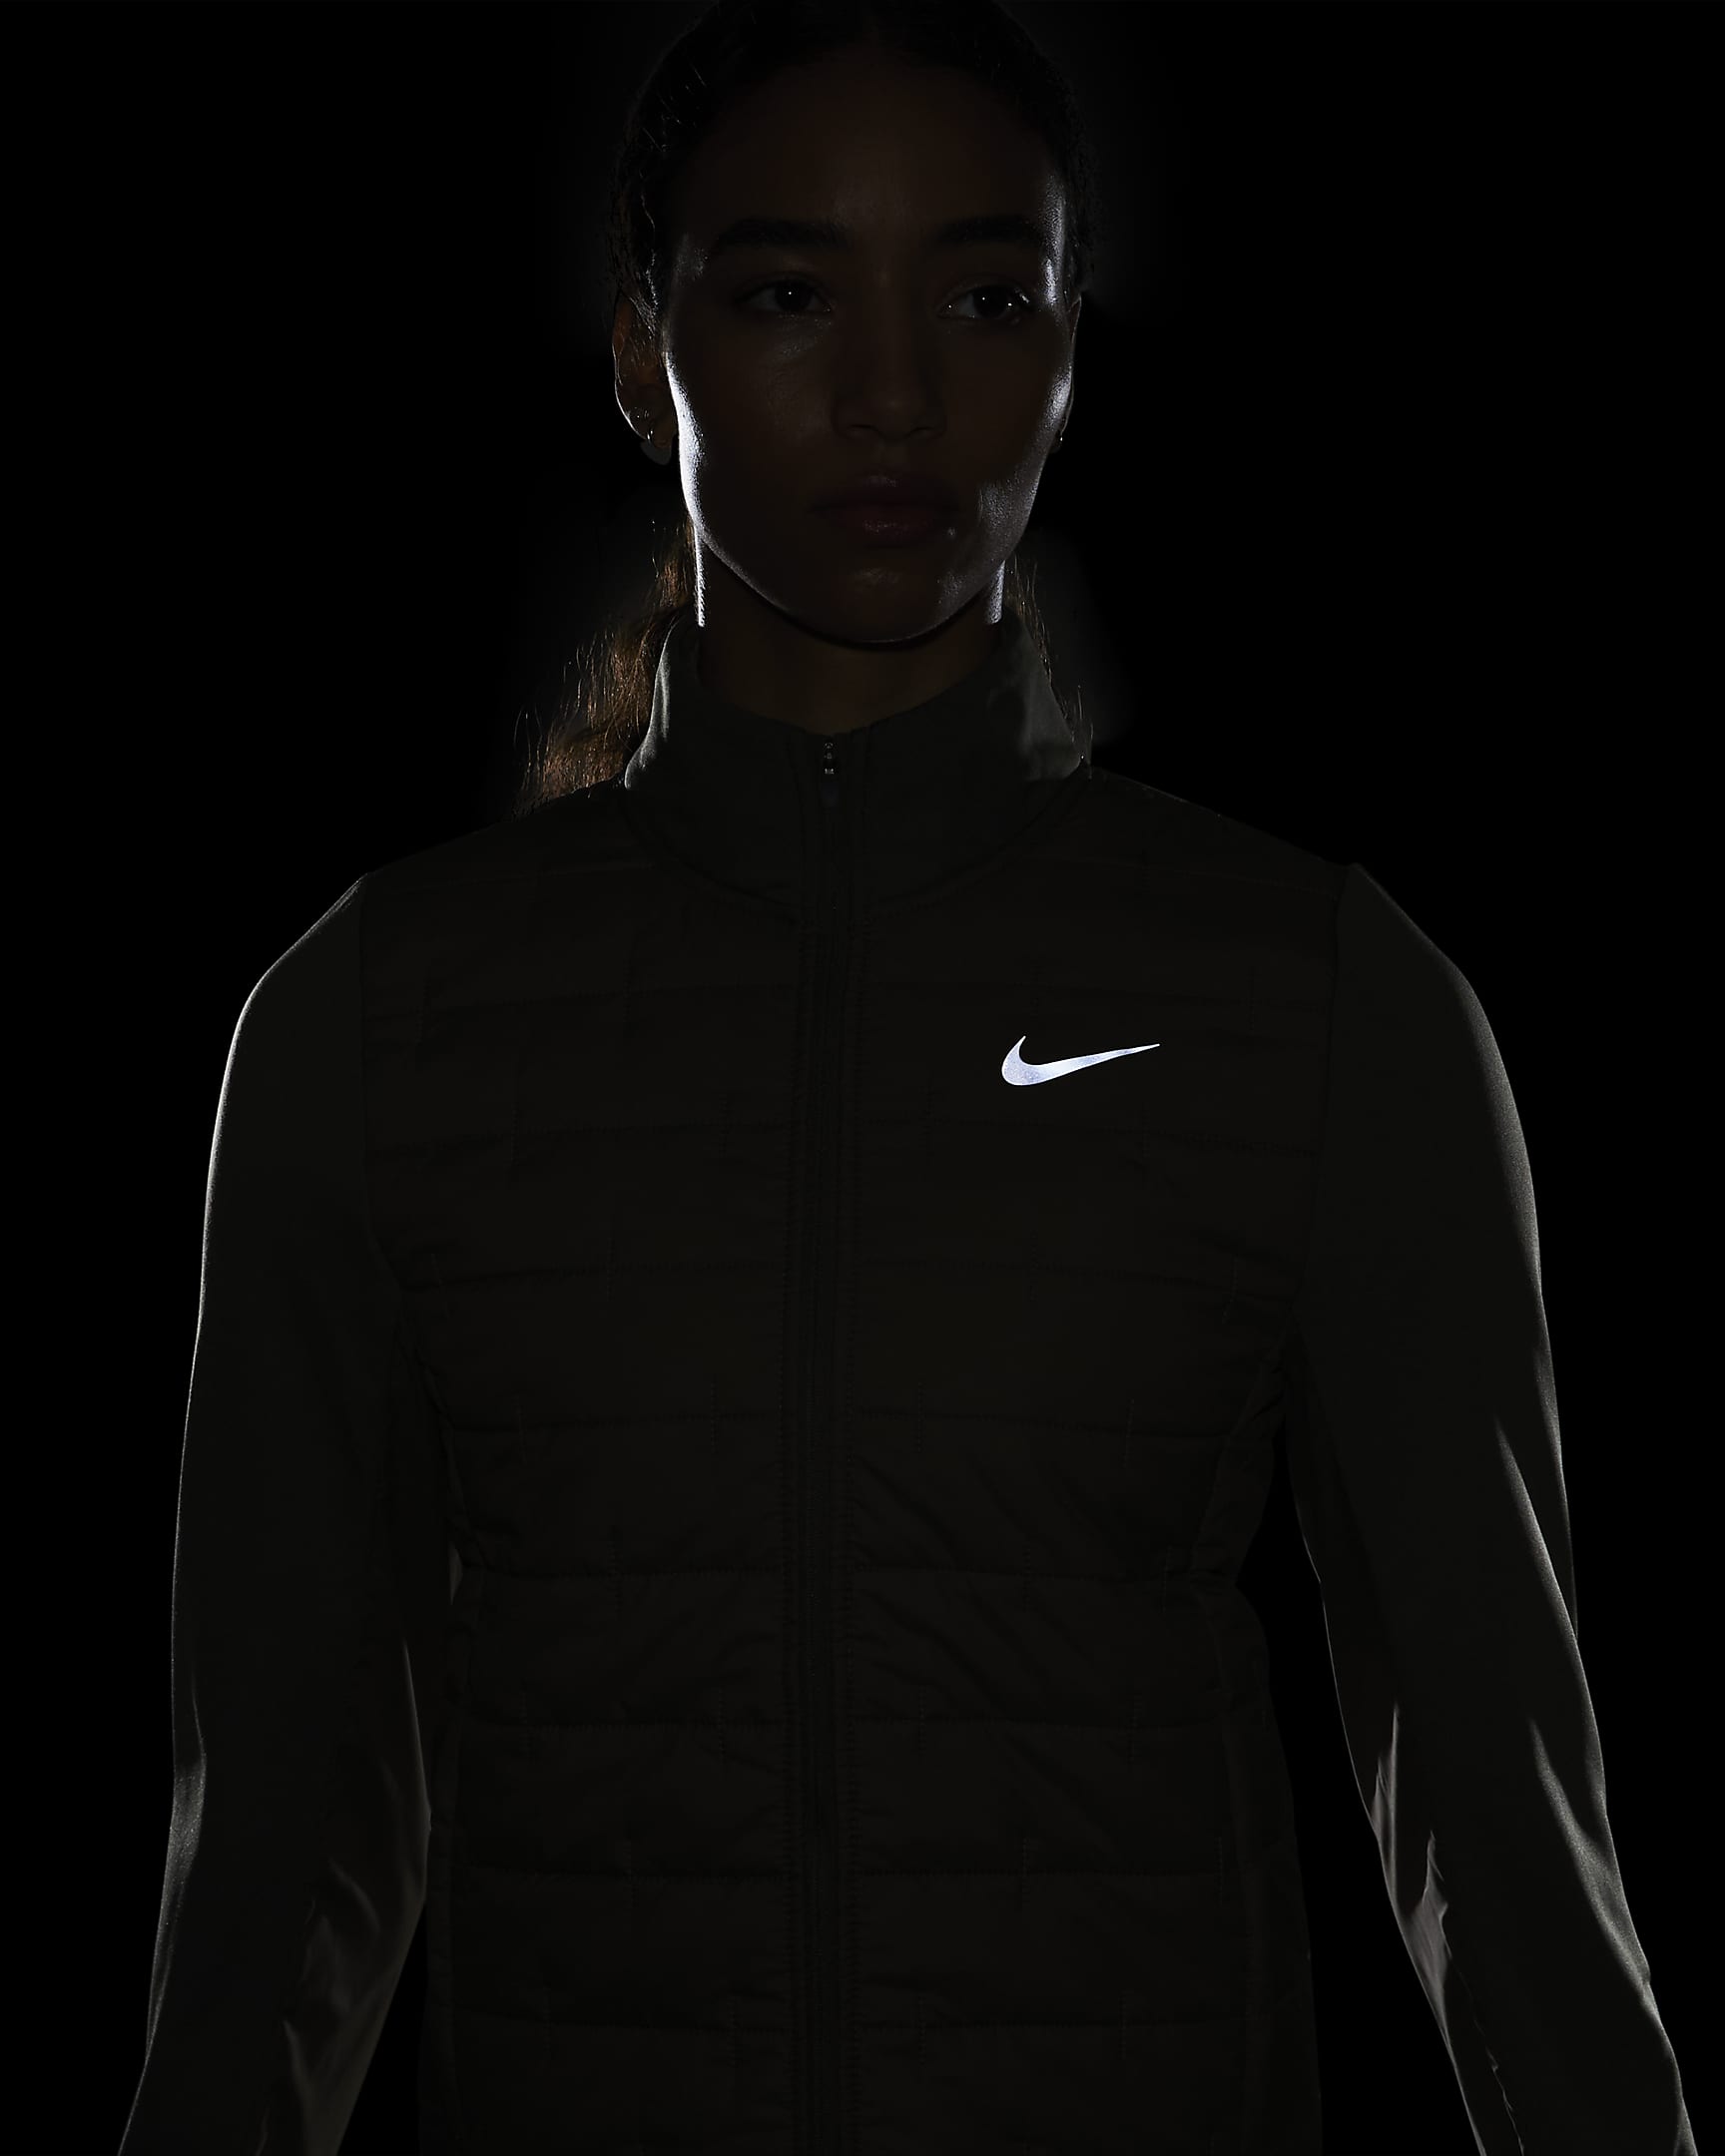 Nike Therma-FIT Women's Synthetic Fill Jacket - Medium Olive